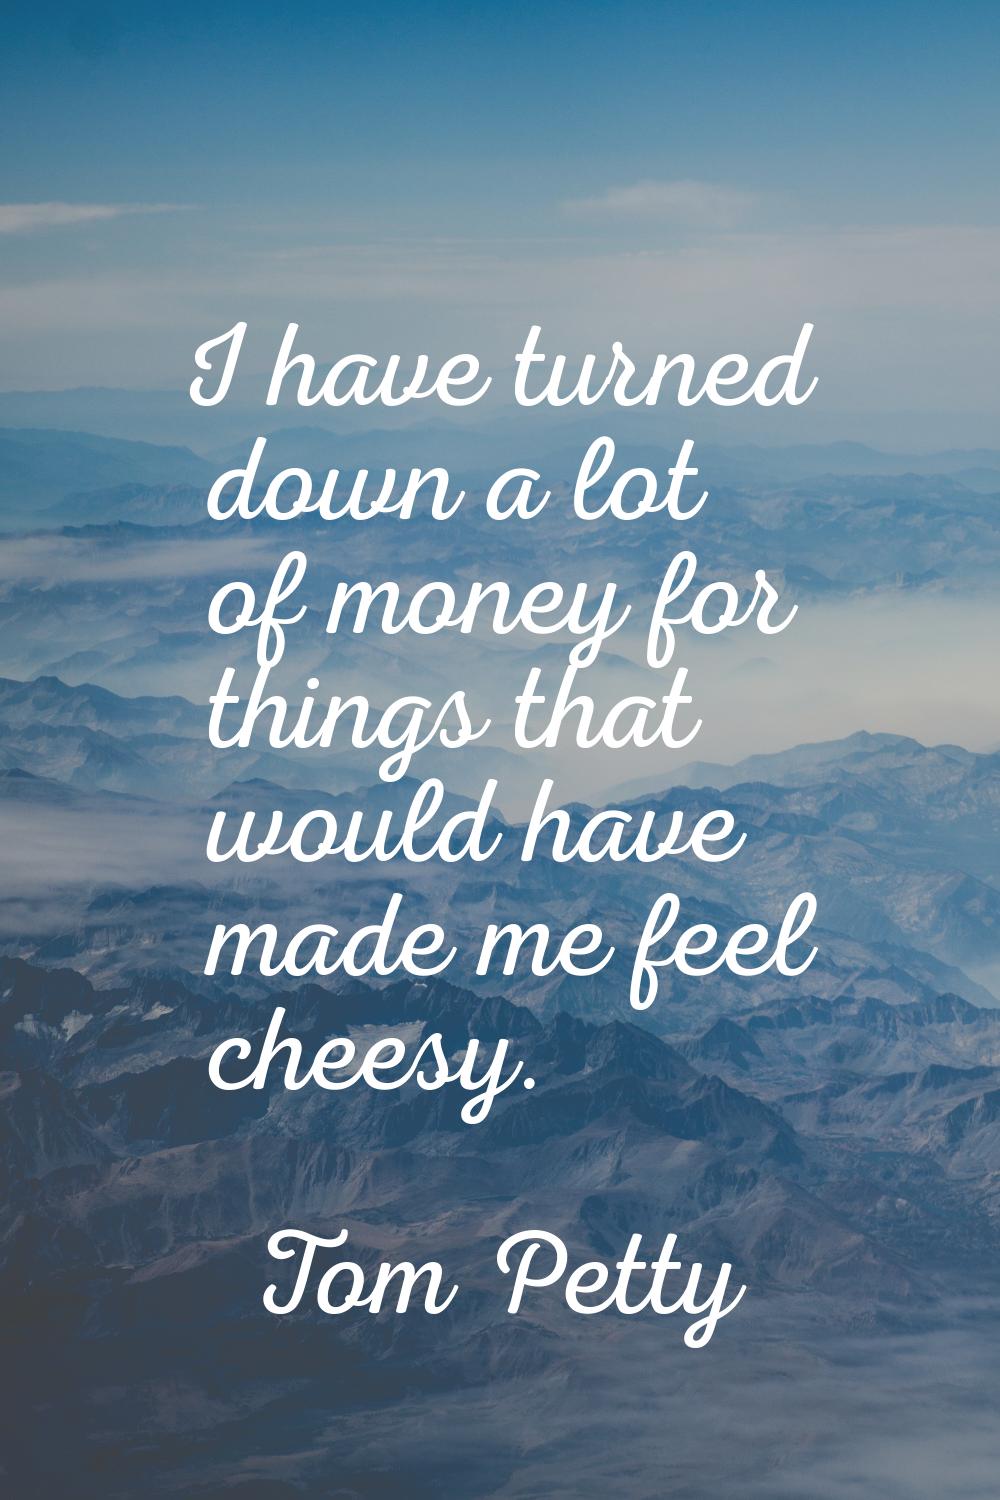 I have turned down a lot of money for things that would have made me feel cheesy.